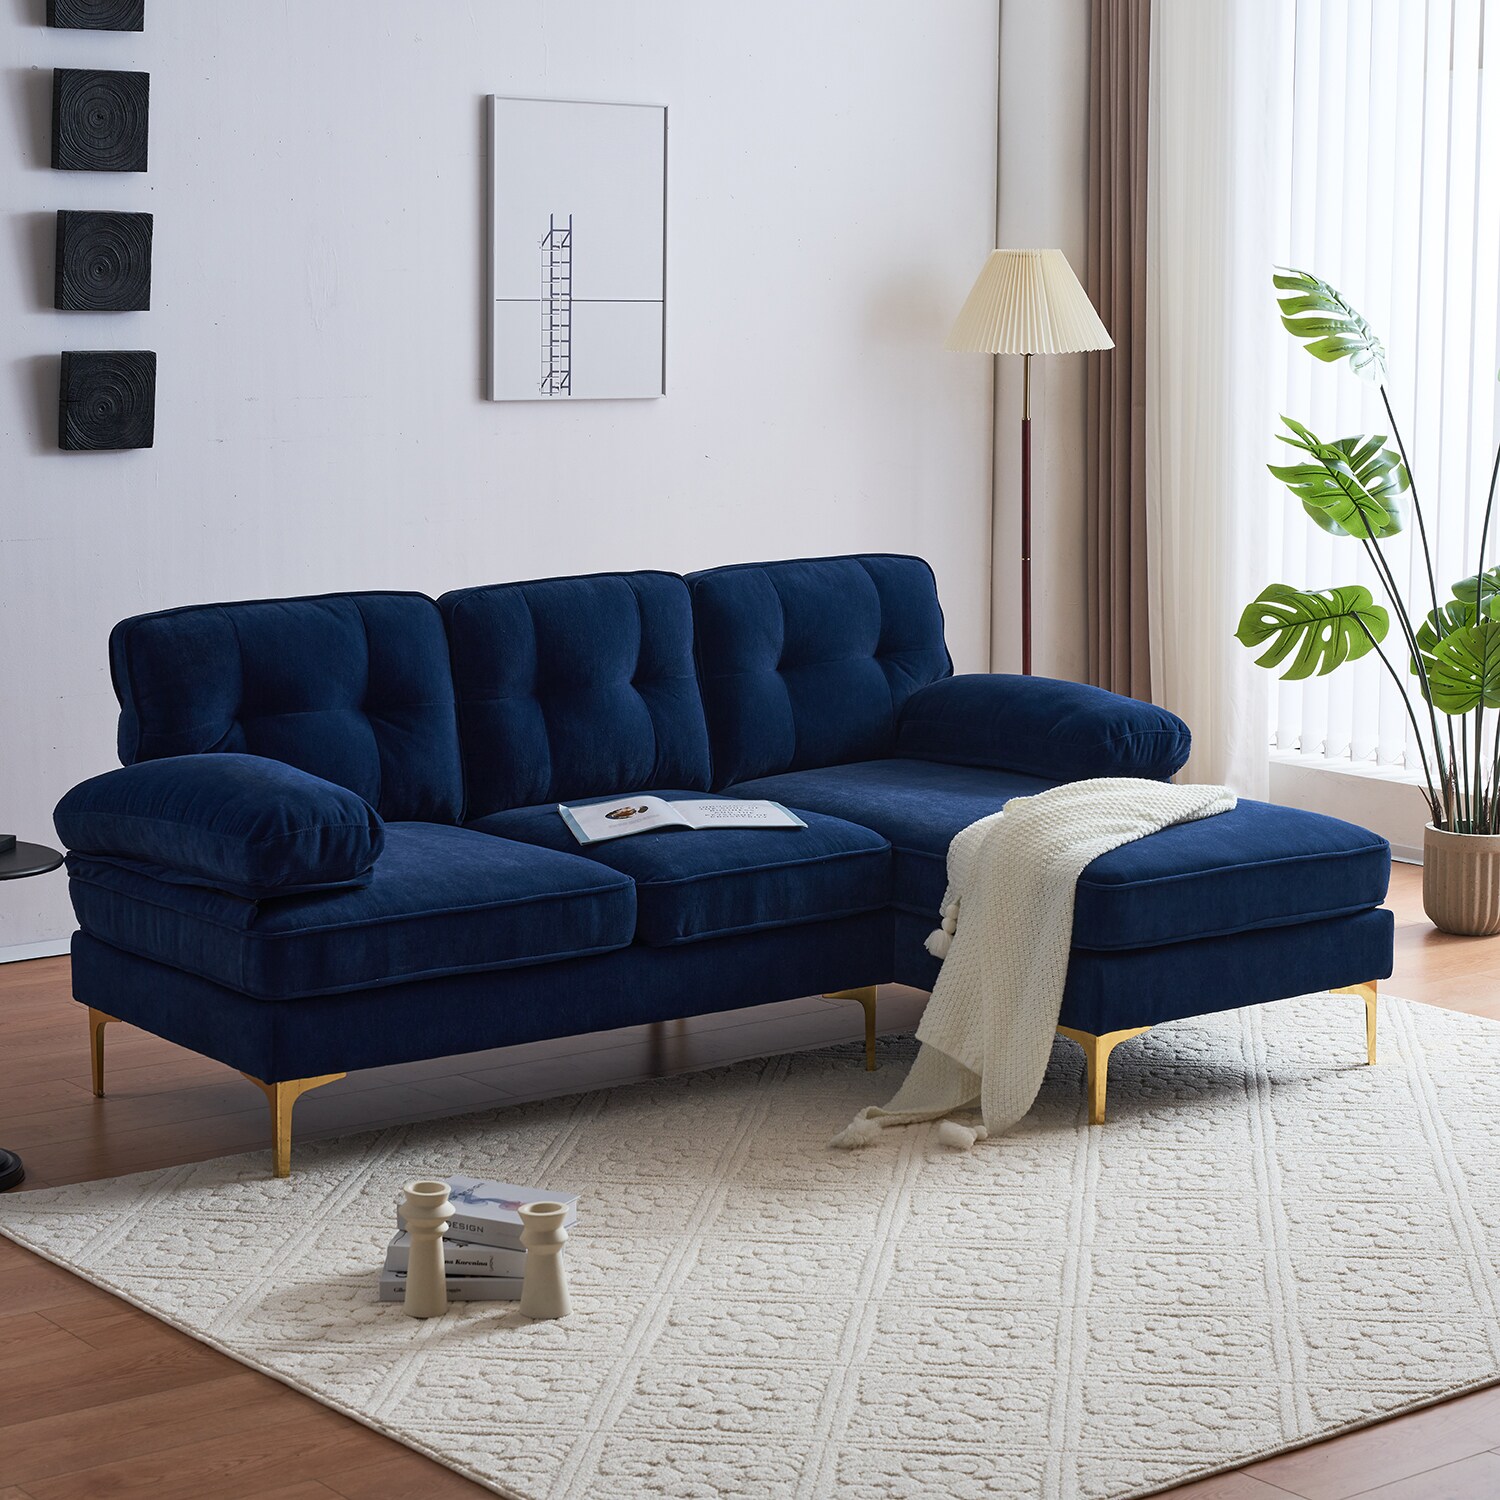 Sectional Blue Couches, Sofas & Loveseats at Lowes.com